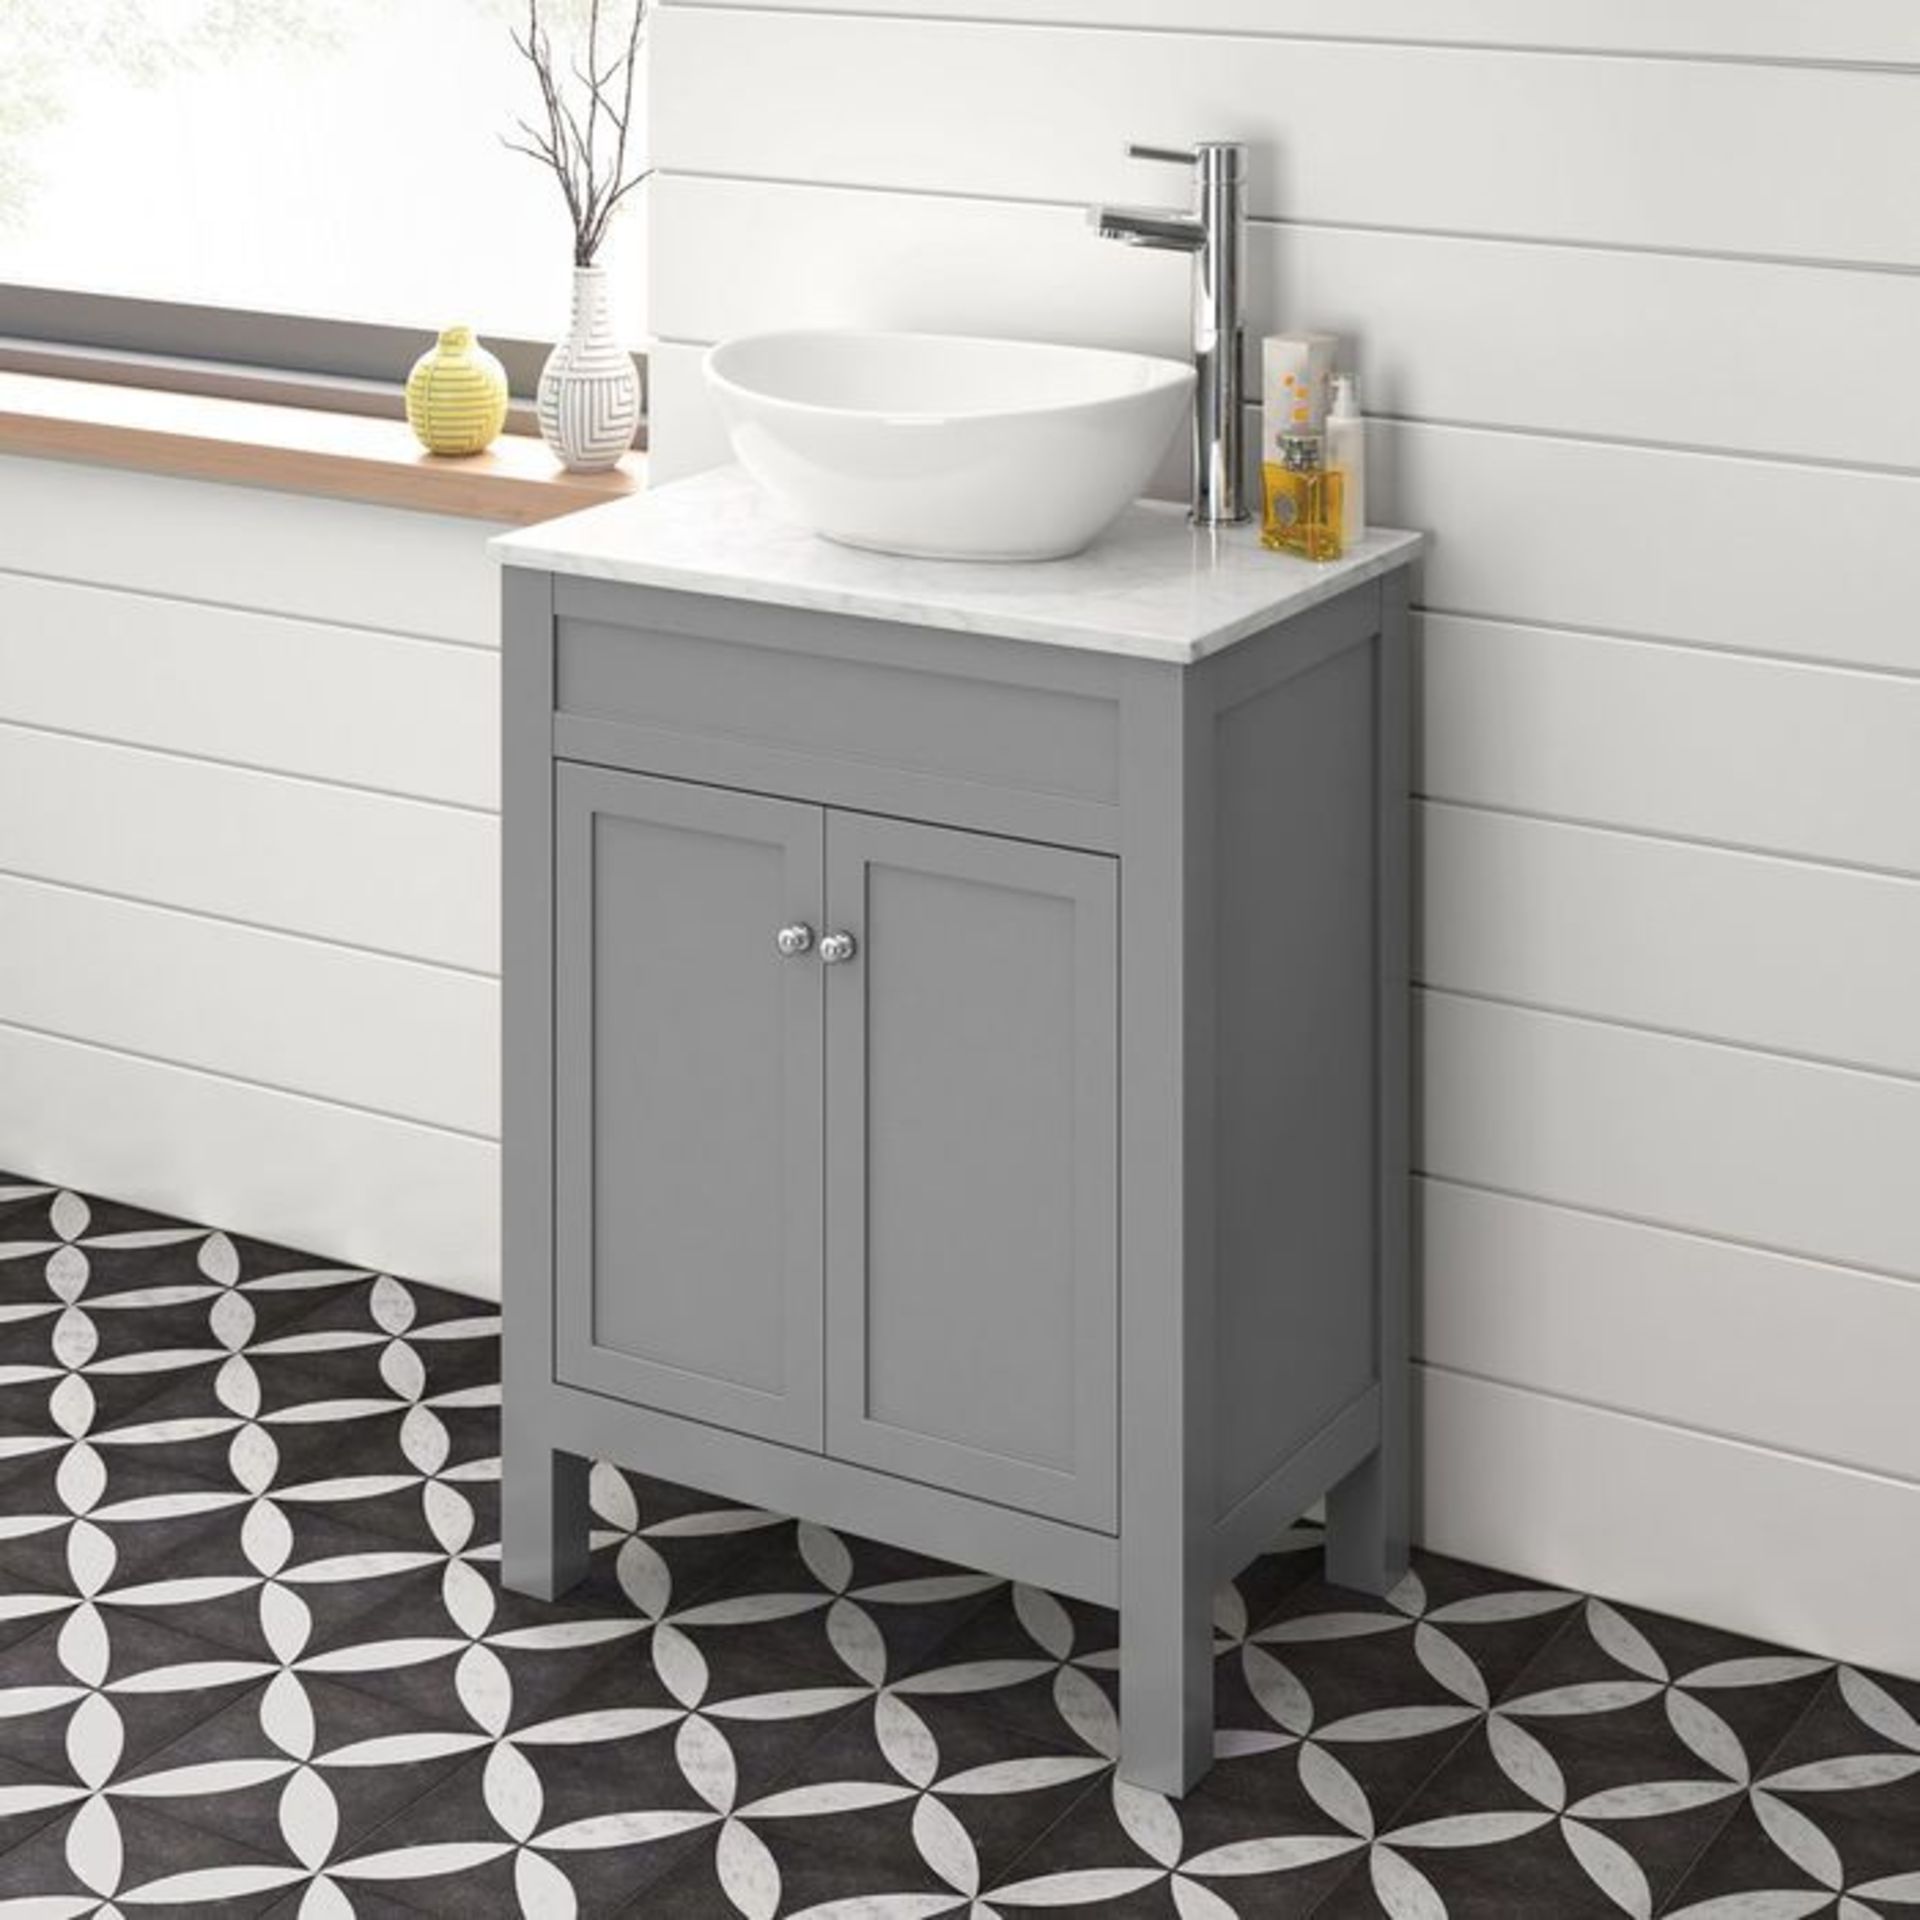 BRAND NEW 600mm Melbourne Earl Grey Stone Countertop Unit & Camila Sink - Floor Standing. RRP £849. - Image 3 of 5